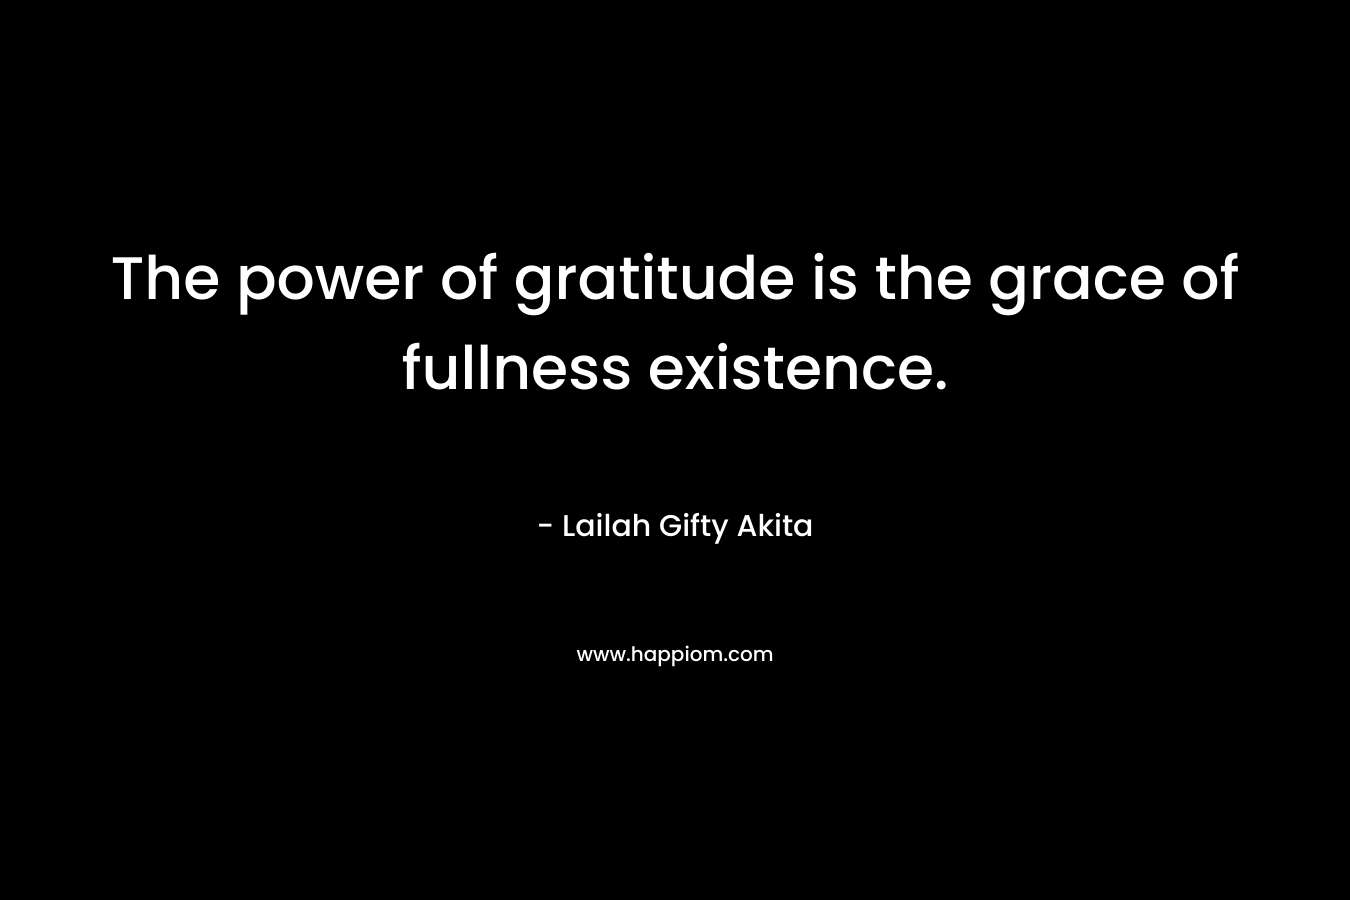 The power of gratitude is the grace of fullness existence.